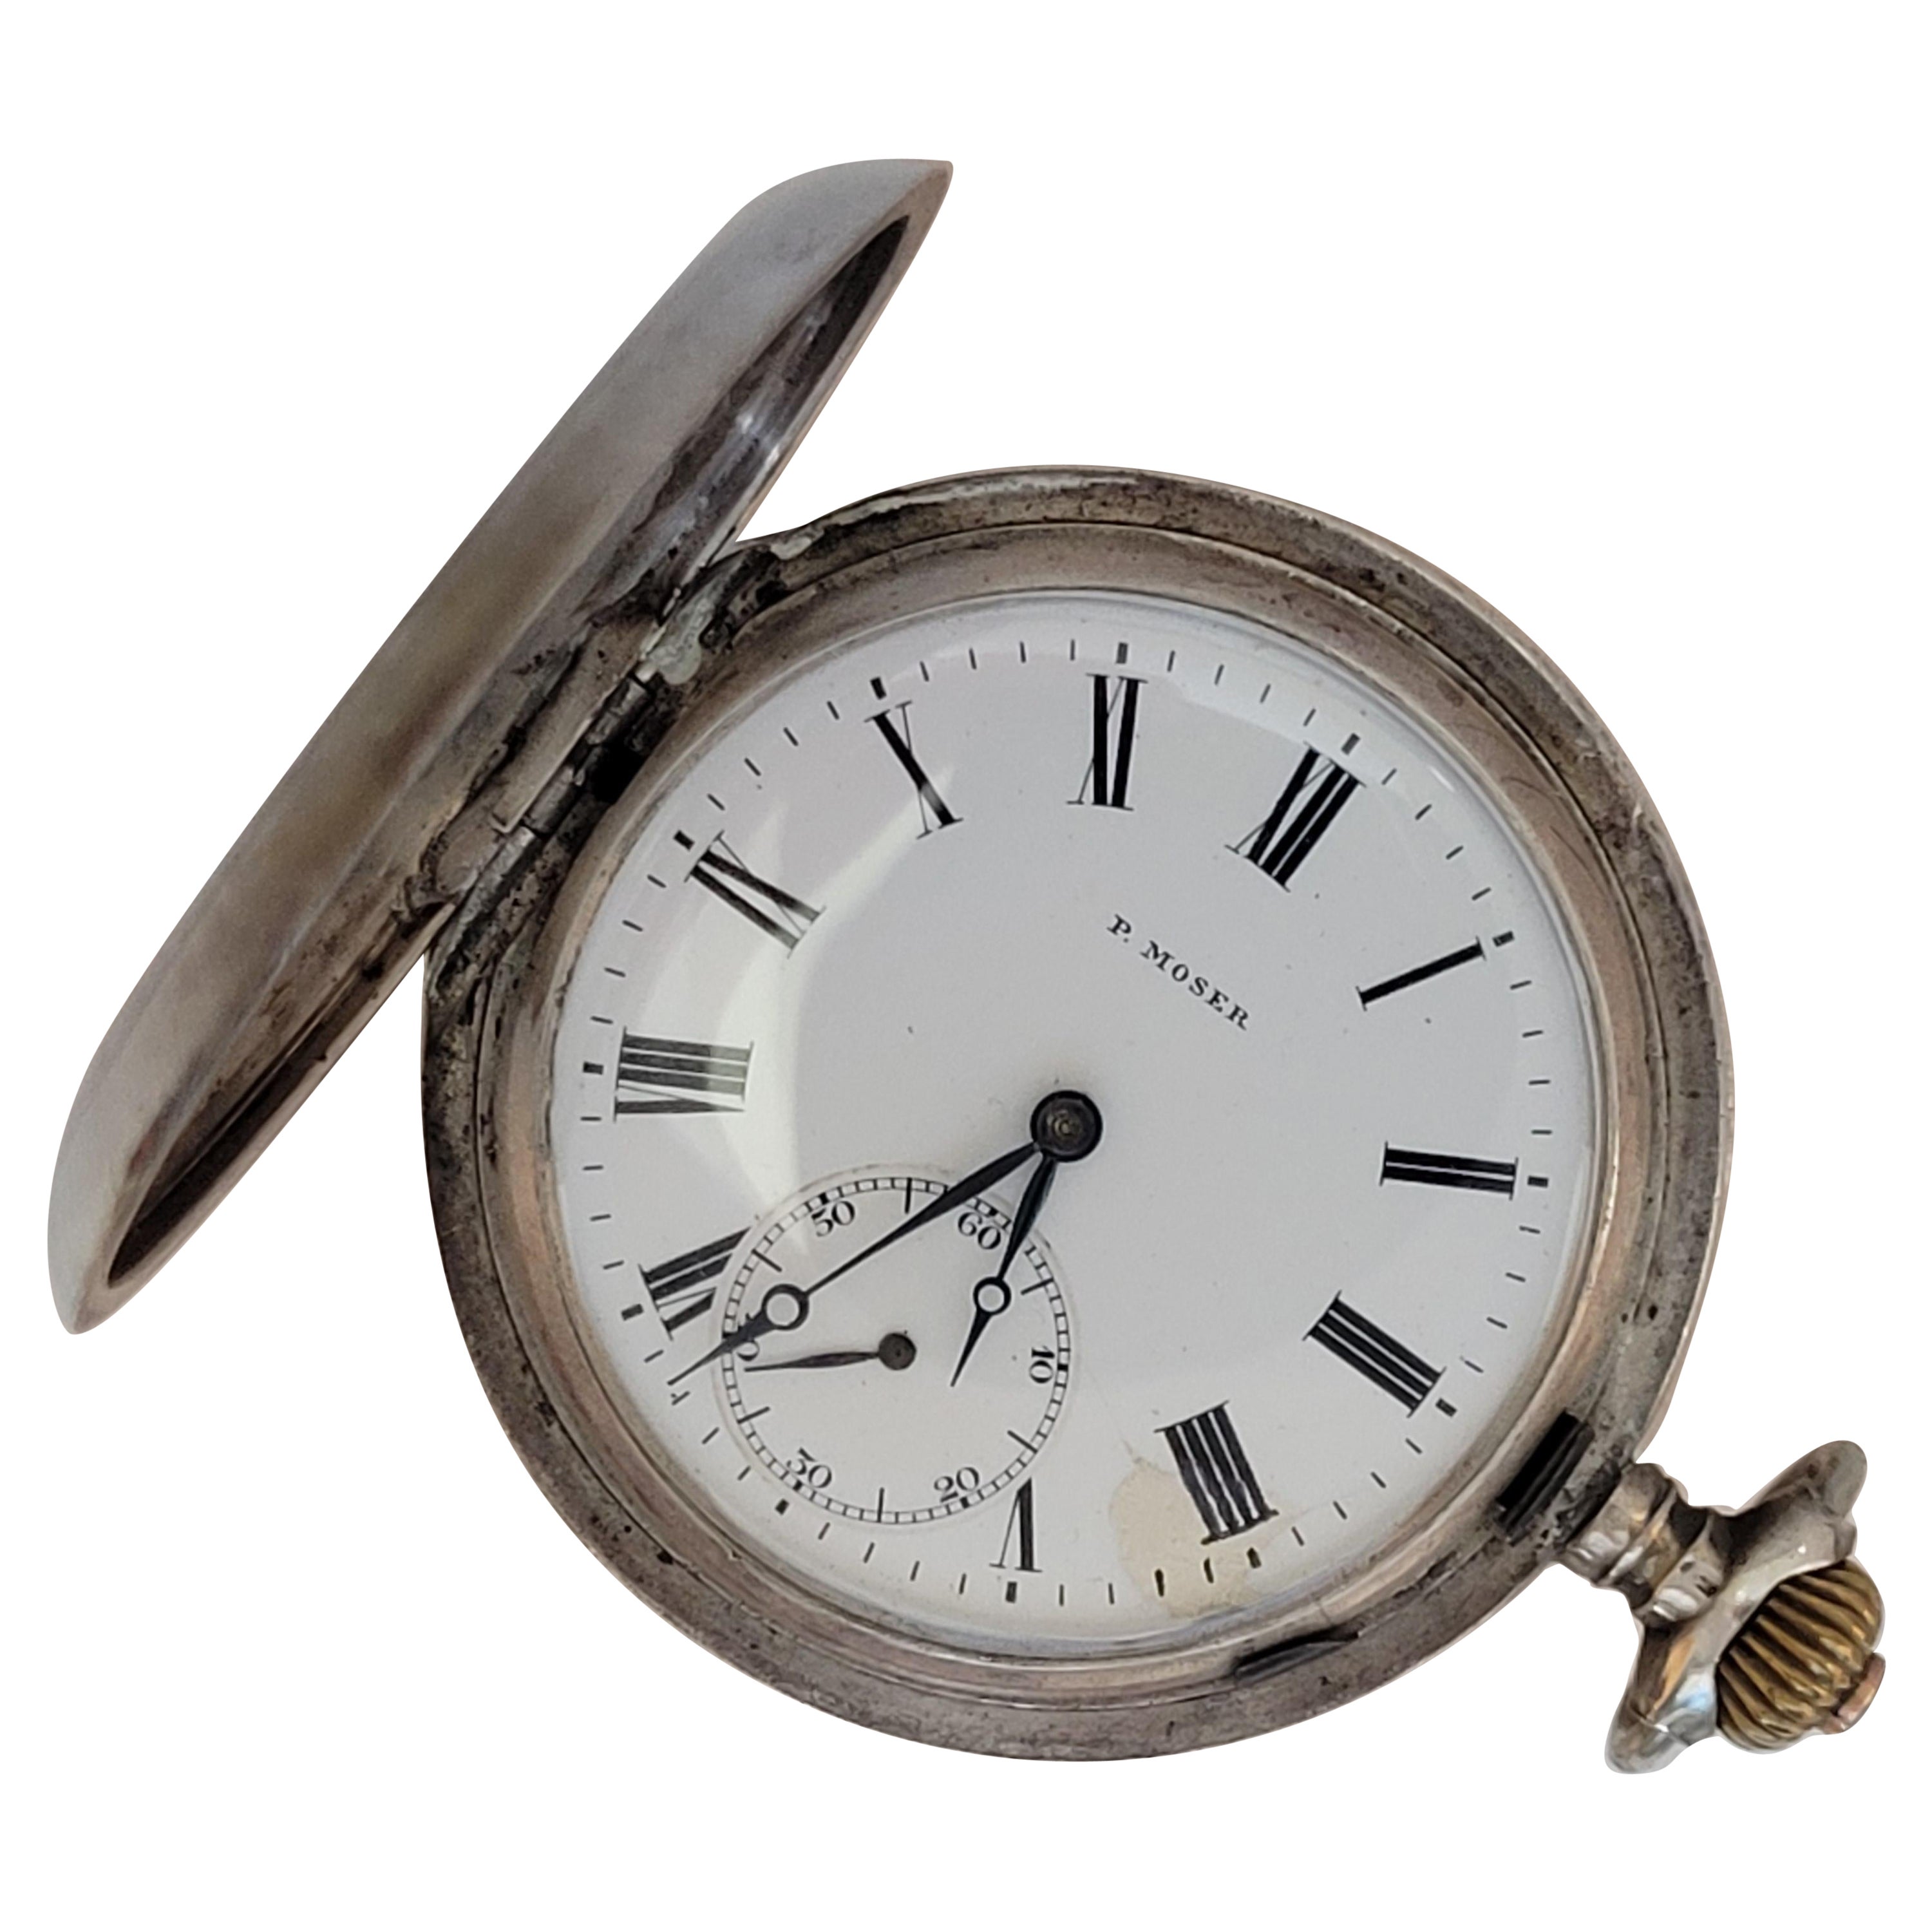 P Moser Pocket Watch Working Case Year 1910 Swiss Made 875 Silver For Sale